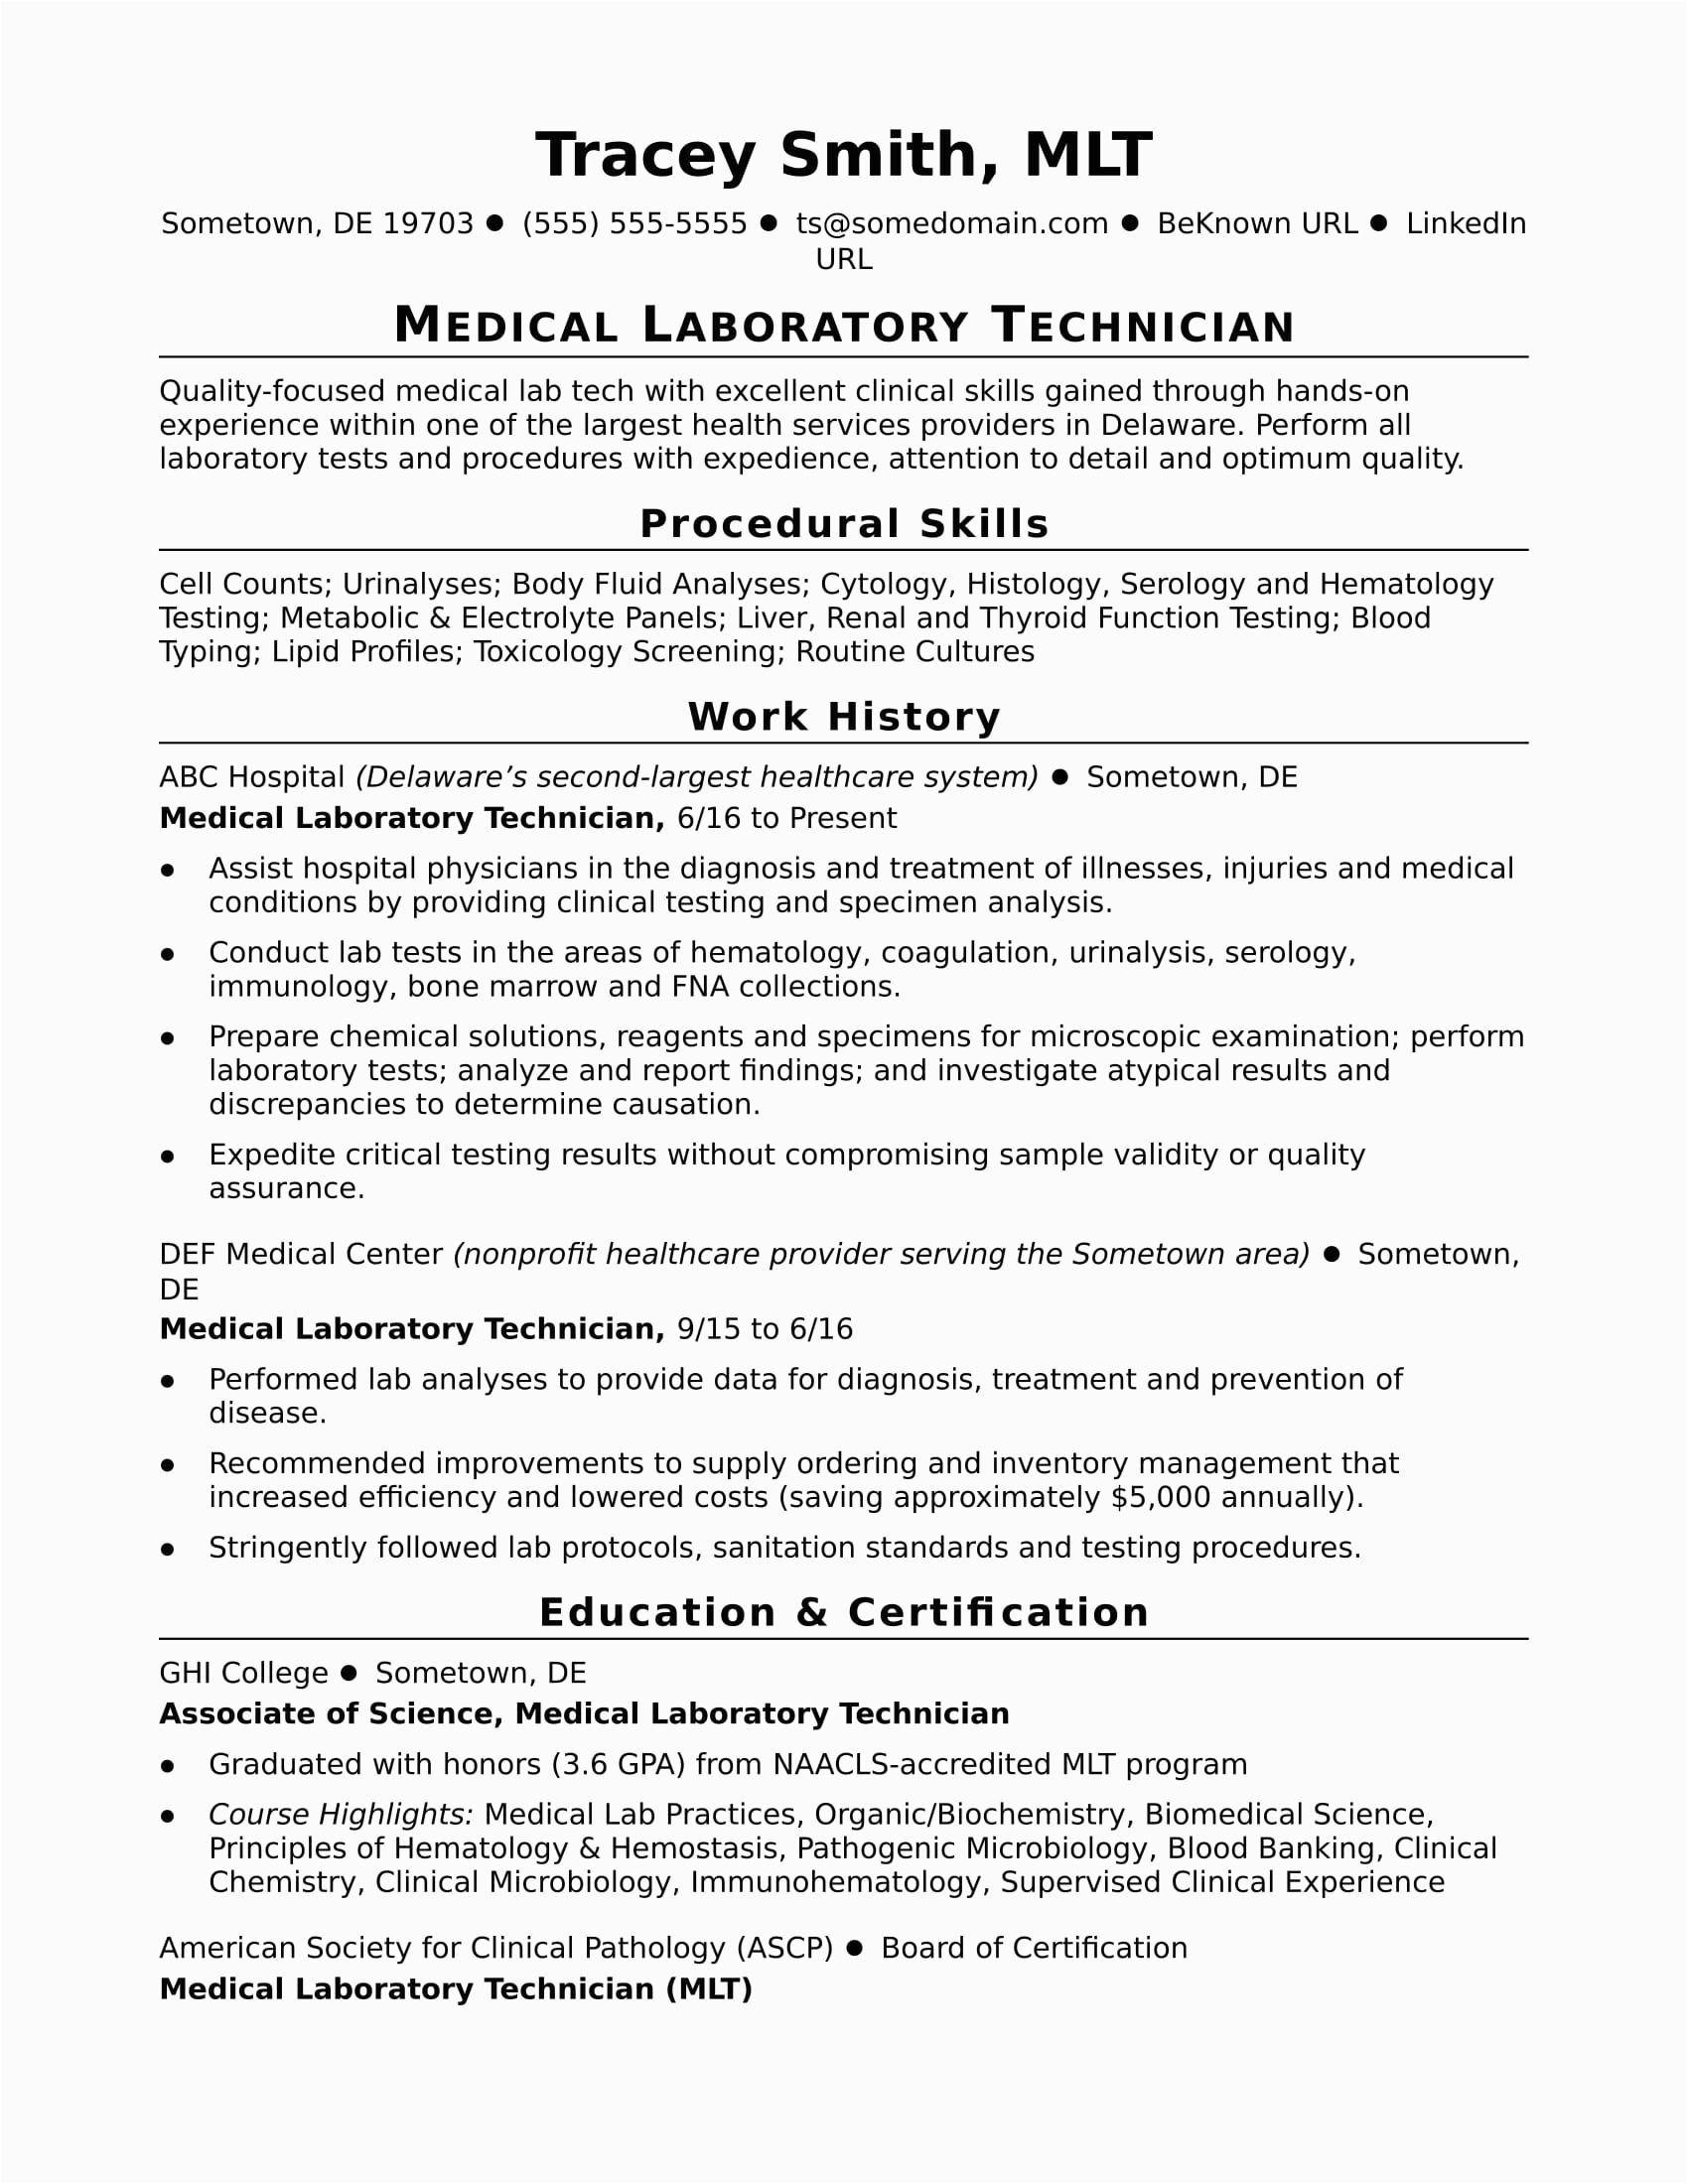 Sample Resume for Medical Lab Technician Entry Level Entry Level Lab Technician Resume Sample